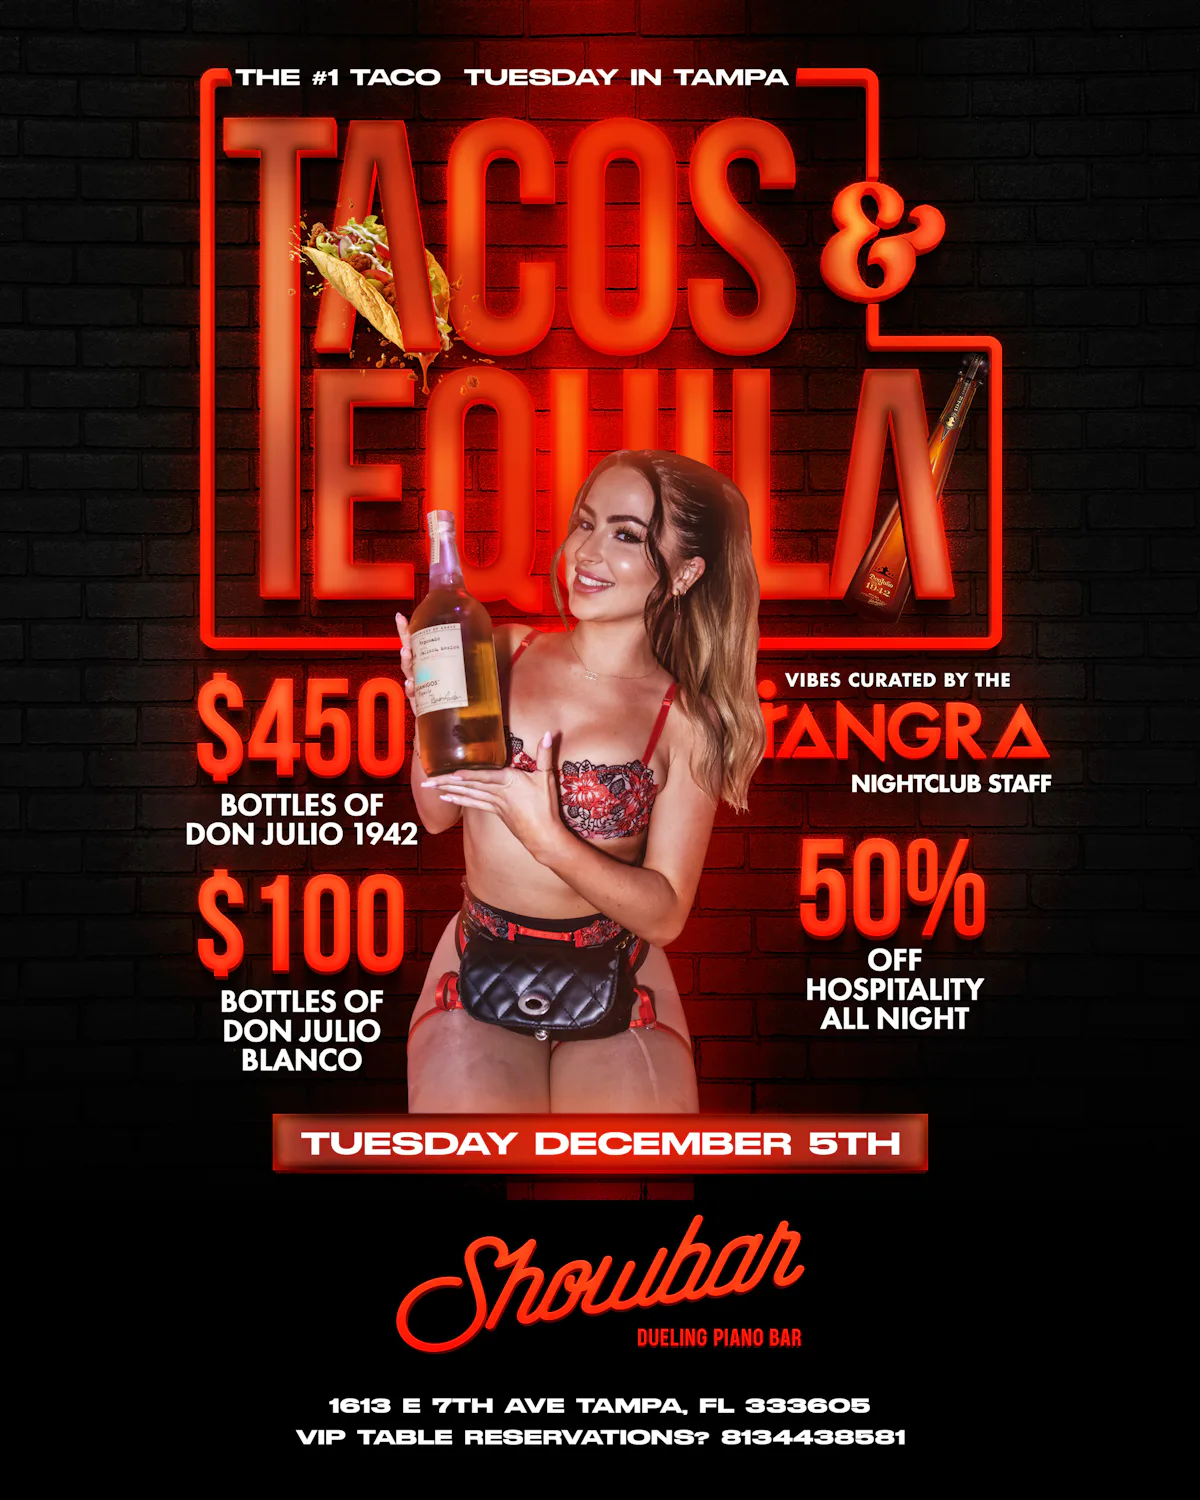 Tacos and Tequila Tuesdays at Showbar 